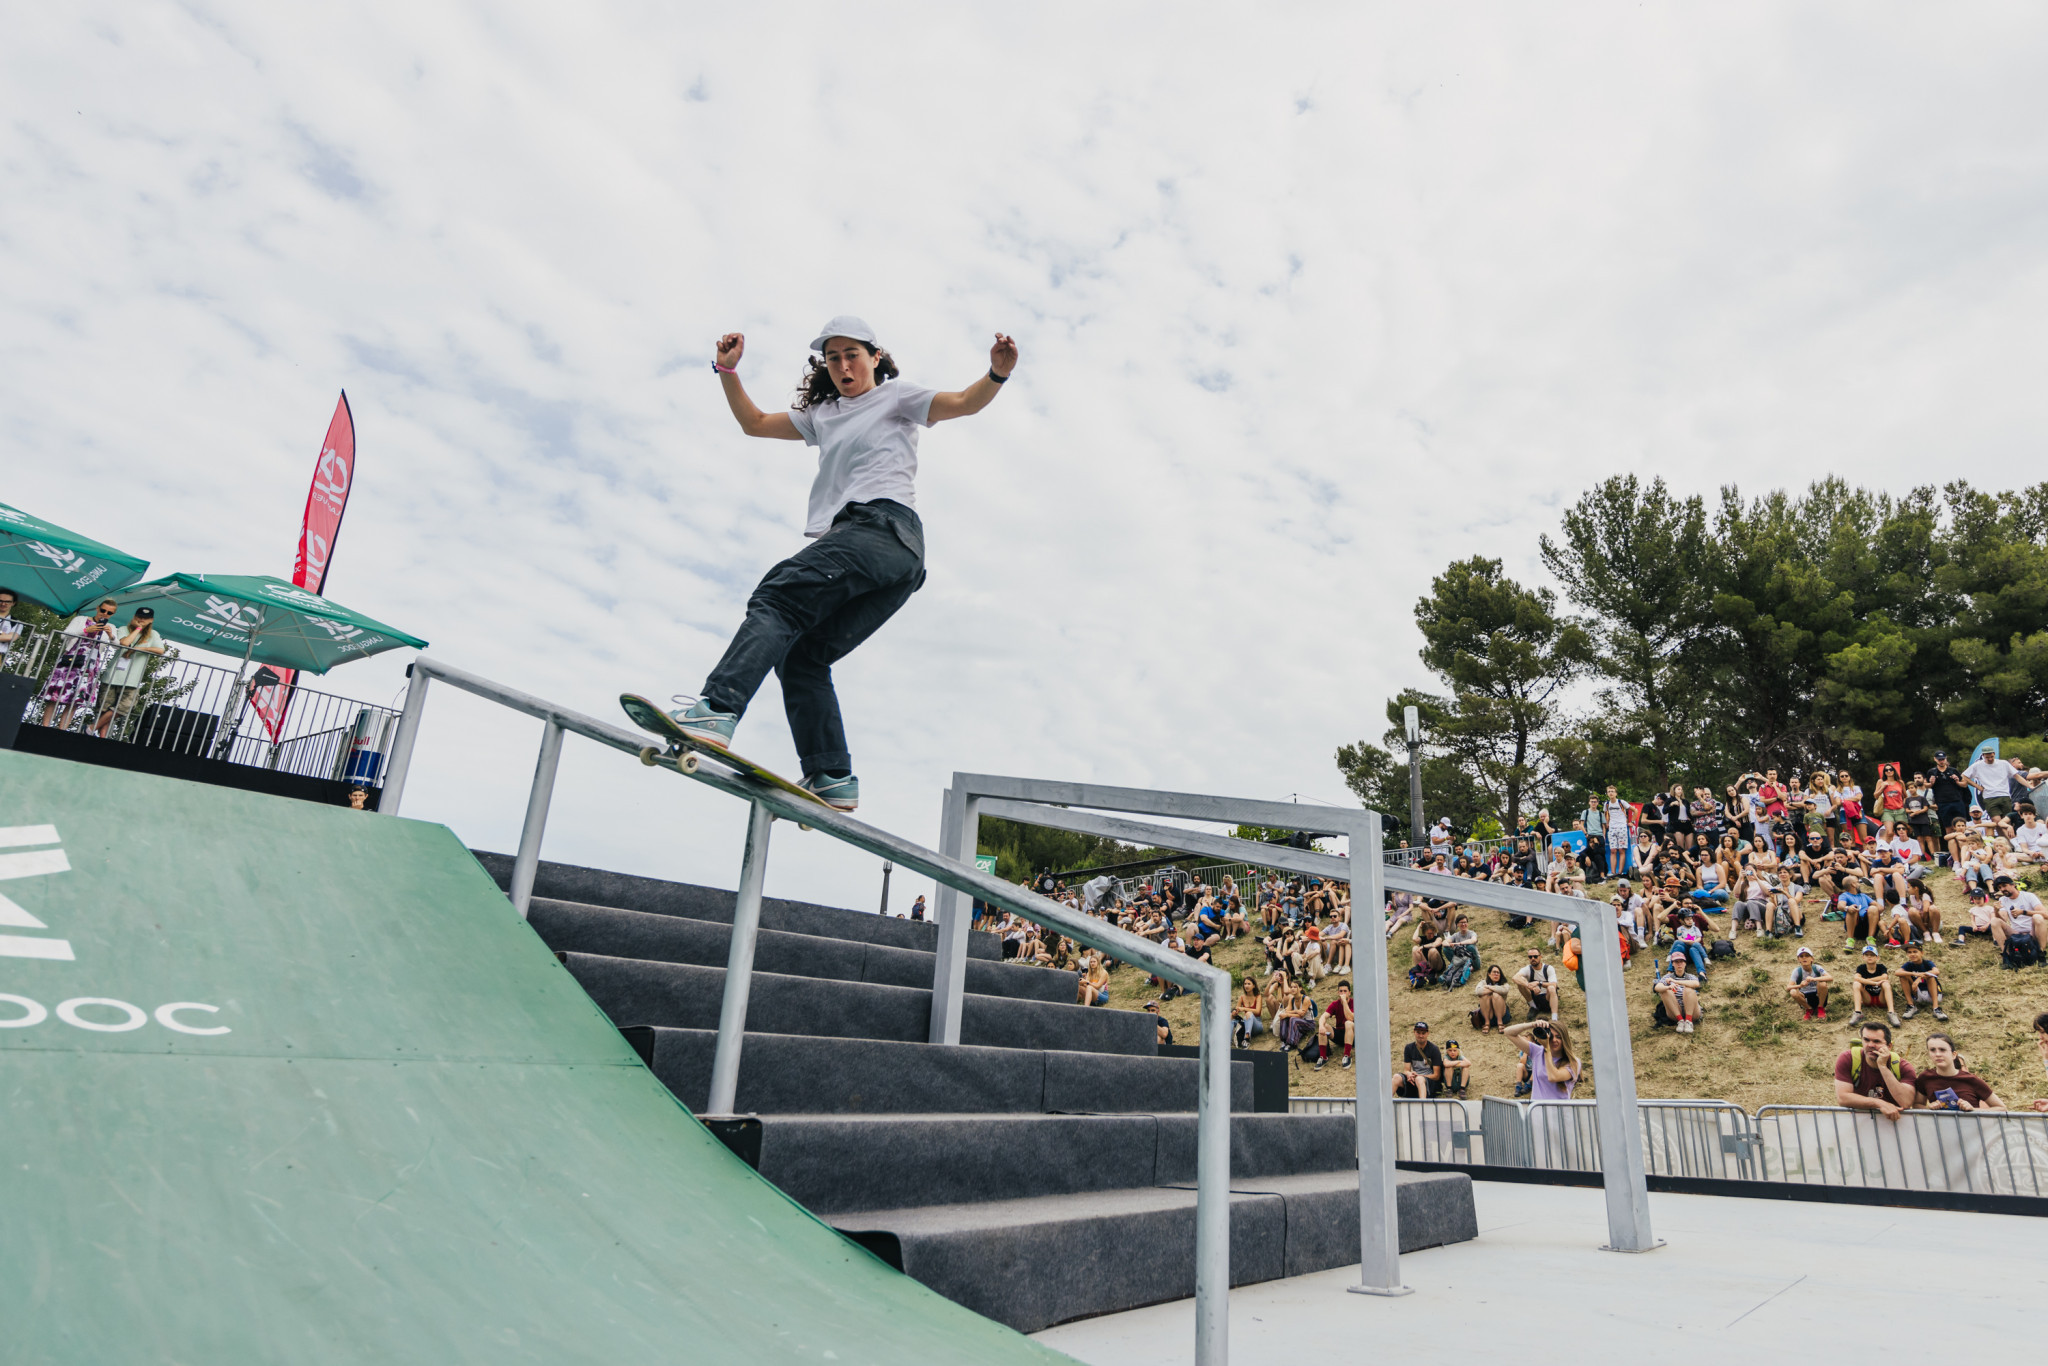 Charlotte Hym won gold at the FISE women's street skateboarding event today in Montpellier ©Hurricane - FISE